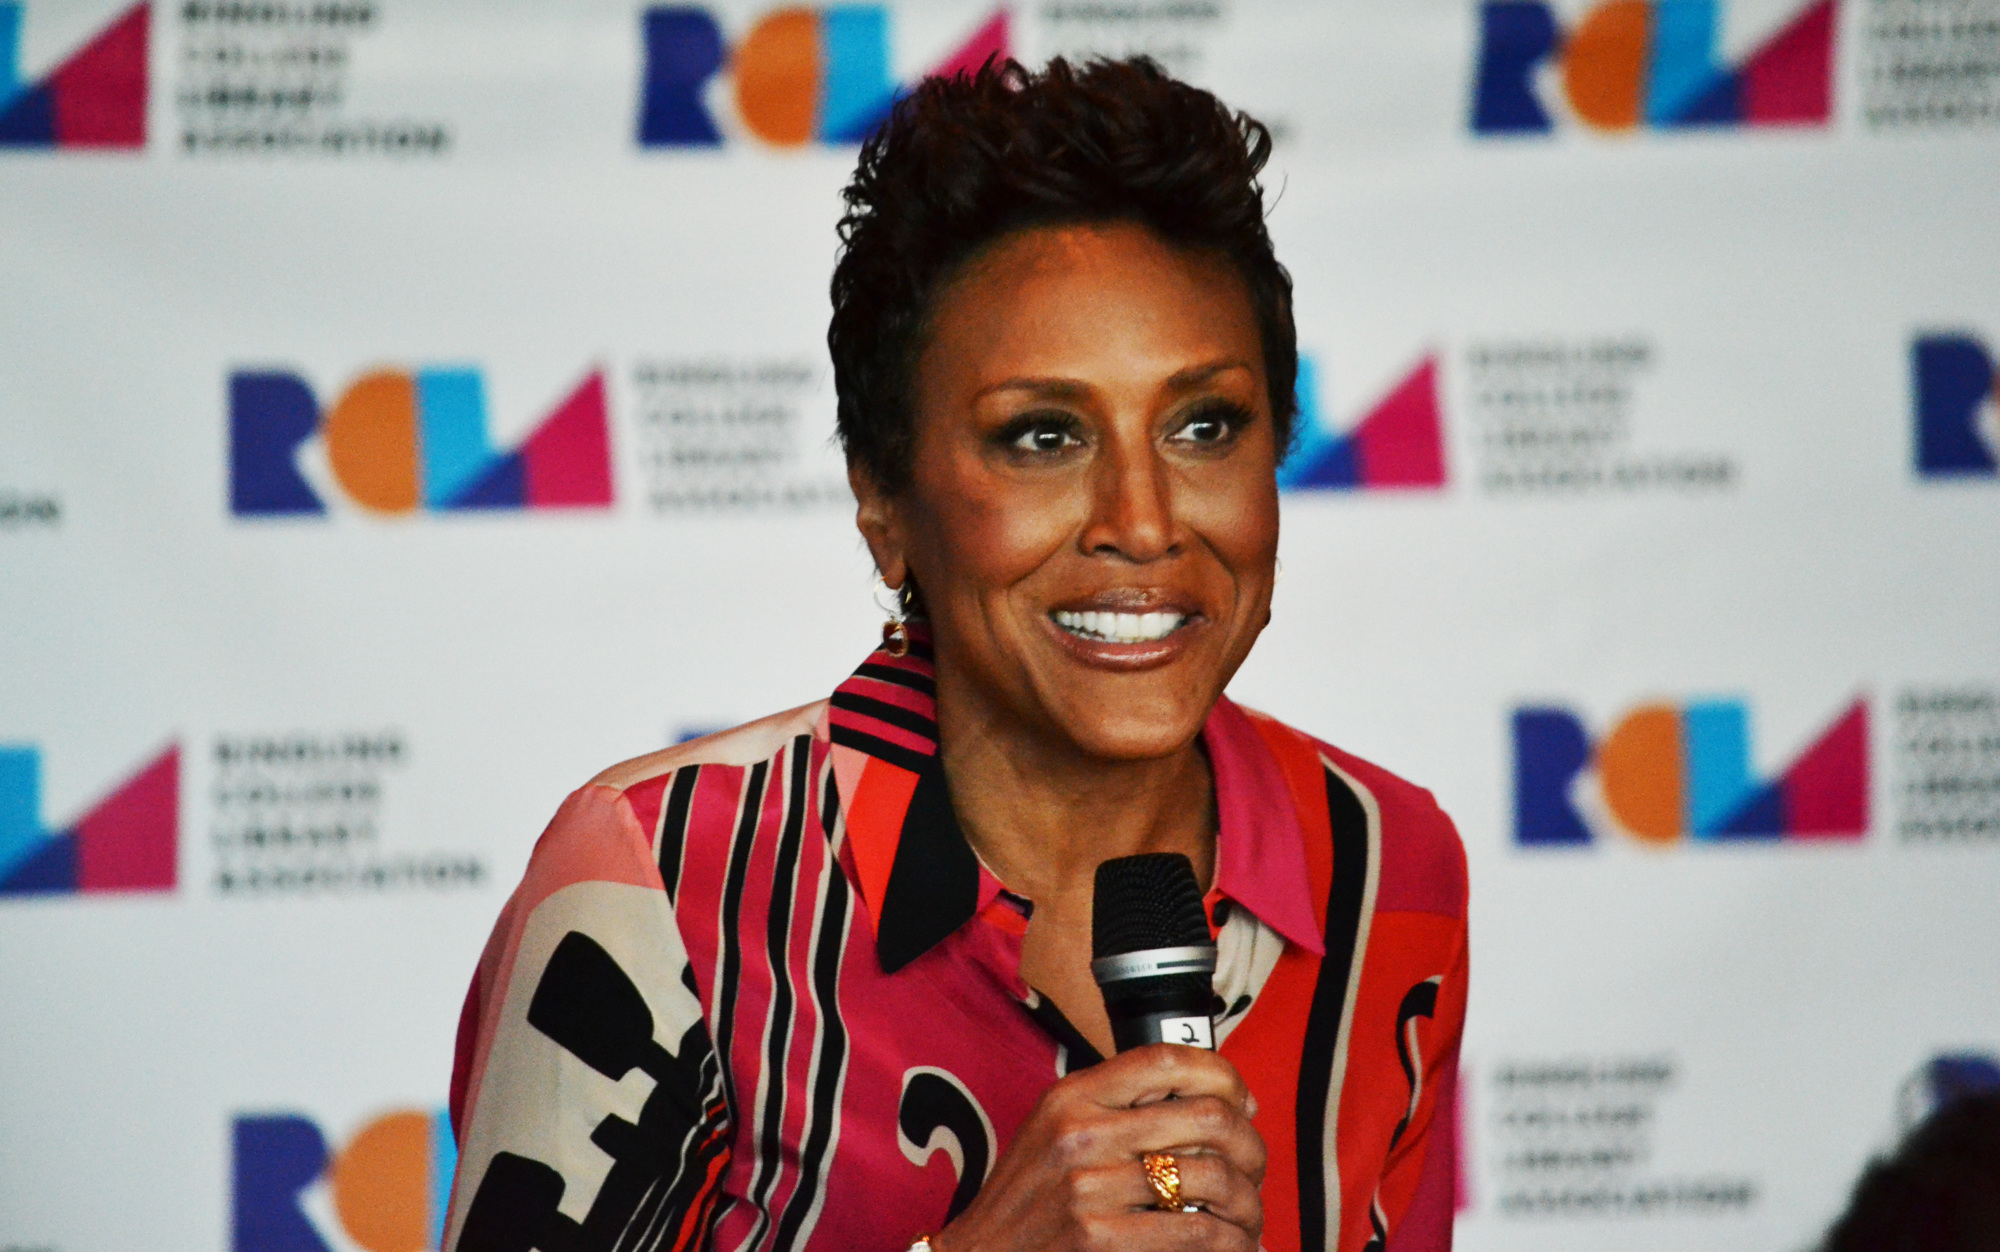 Good Morning America co-anchor Robin Roberts was the featured speaker for the March 7, 2016 Ringling College Library Association Town Hall Lecture Series.